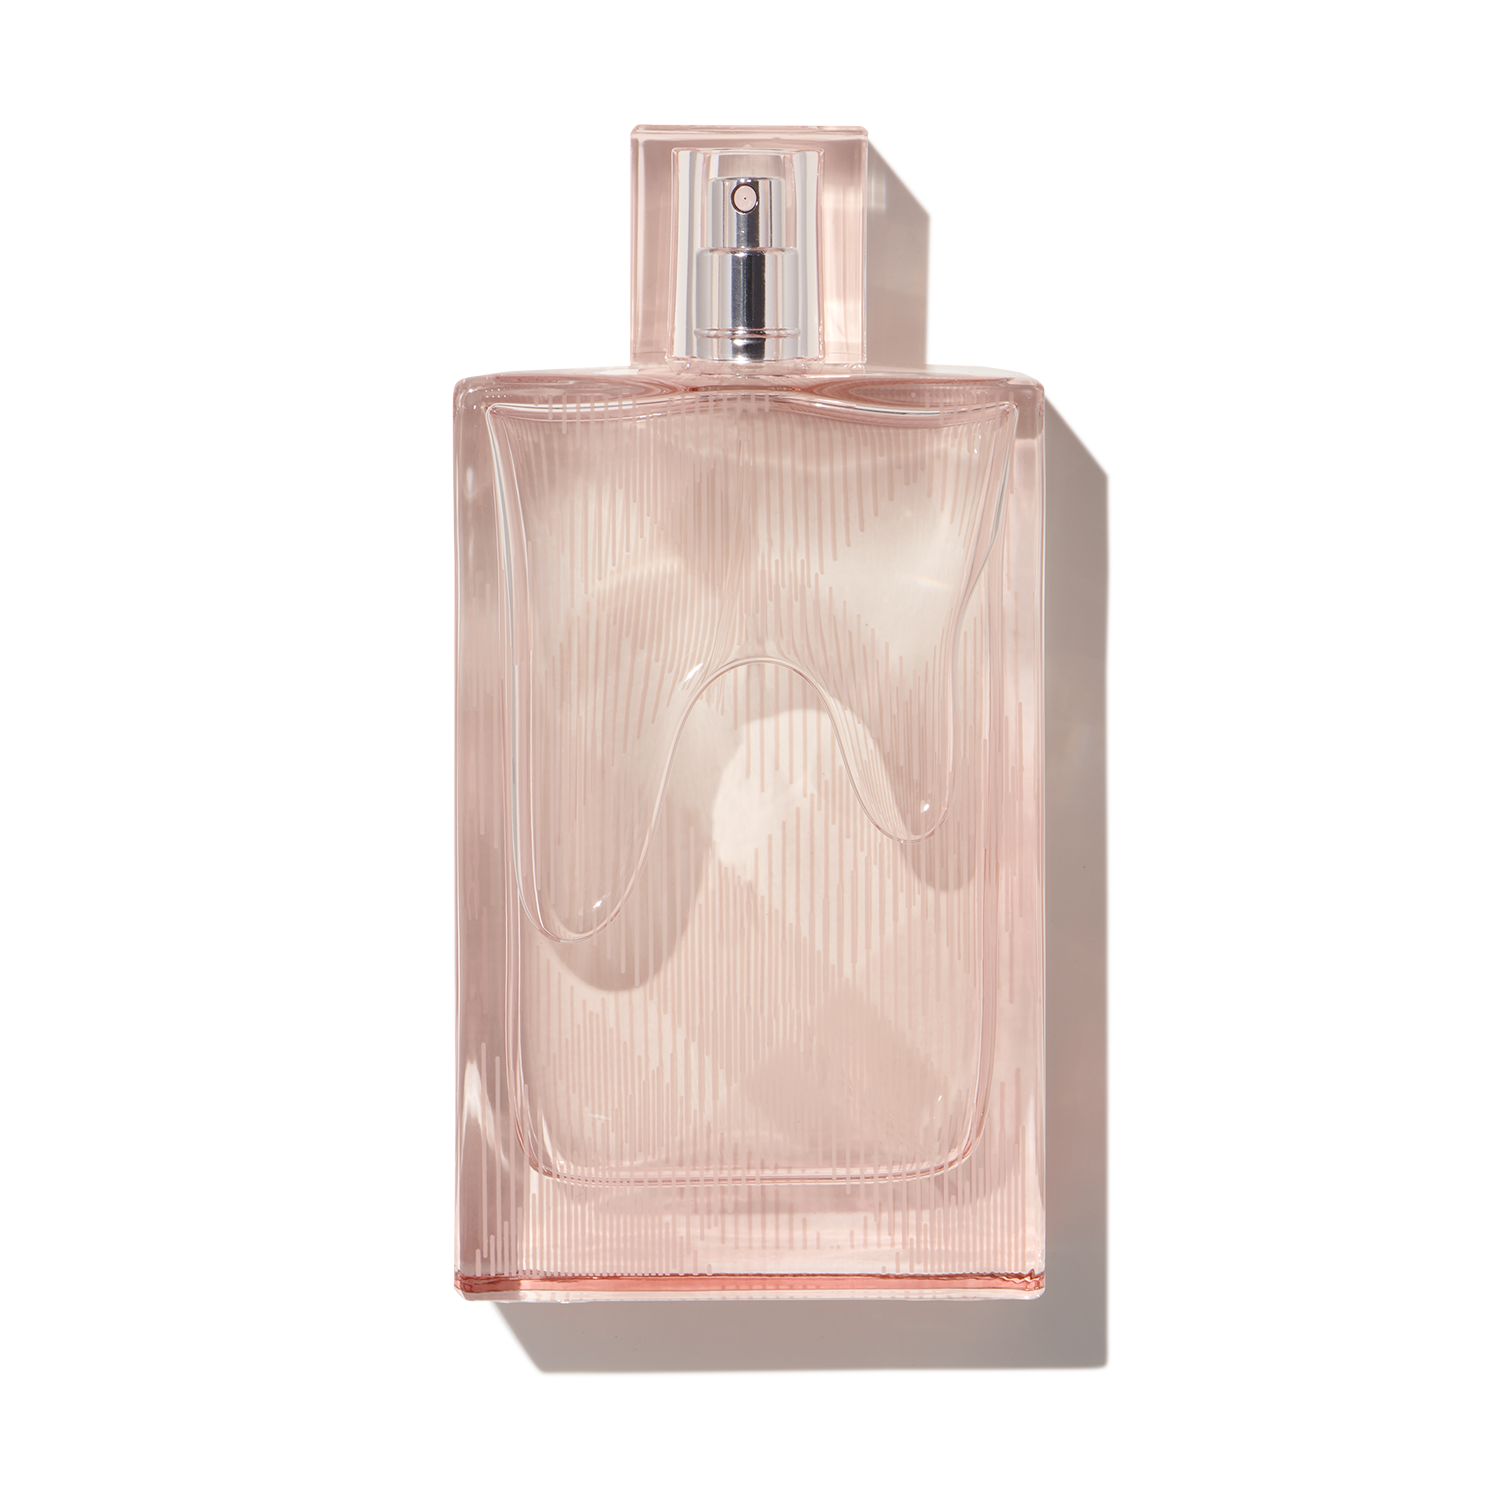 Get Burberry Brit Sheer Scentbird at $16.95 for